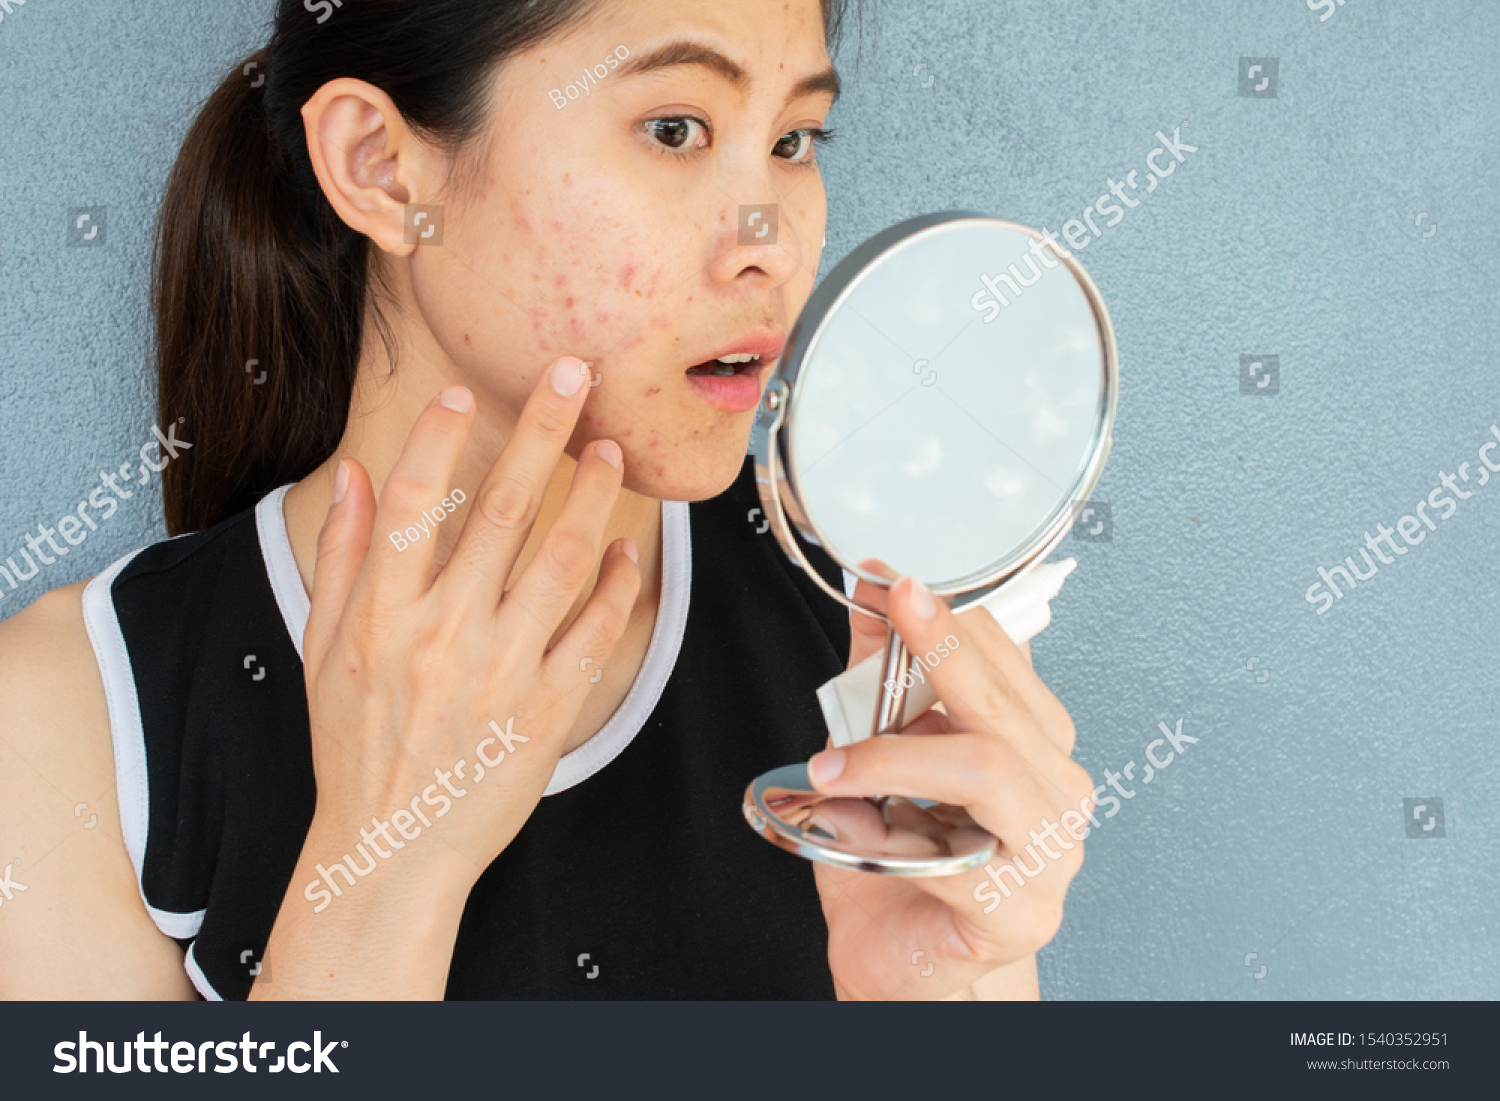 Portrait of Asian woman worry about her face when she saw the problem of acne inflammation and scar by the mini mirror. Conceptual shot of Acne & Problem Skin on female face. #1540352951